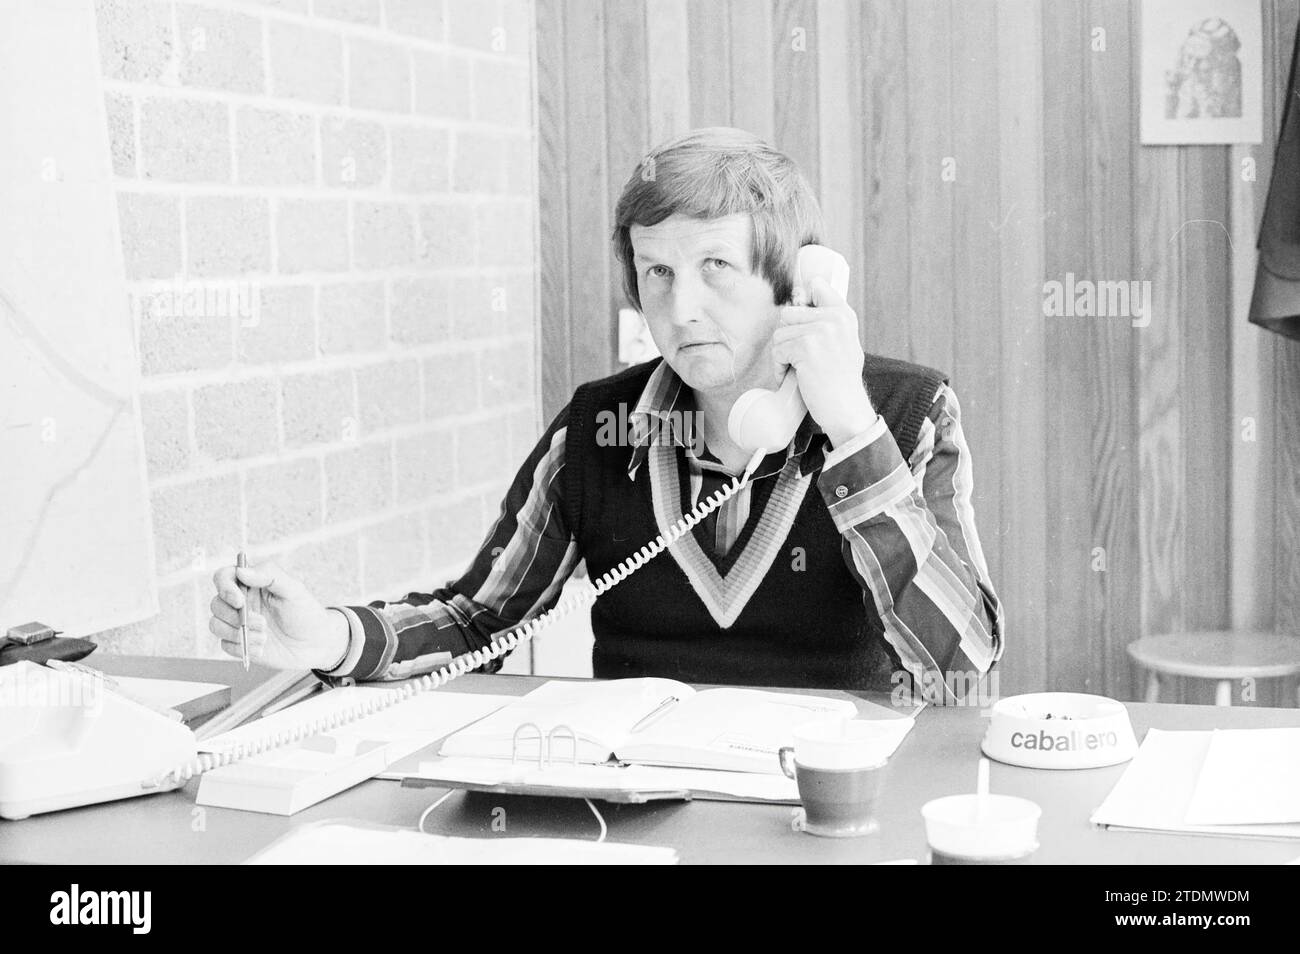 Mr. v.d. Linden, social worker in IJmuiden + savings bank account of f 1000,- for social institution, IJmuiden, Social work, 11-06-1975, Whizgle News from the Past, Tailored for the Future. Explore historical narratives, Dutch The Netherlands agency image with a modern perspective, bridging the gap between yesterday's events and tomorrow's insights. A timeless journey shaping the stories that shape our future Stock Photo